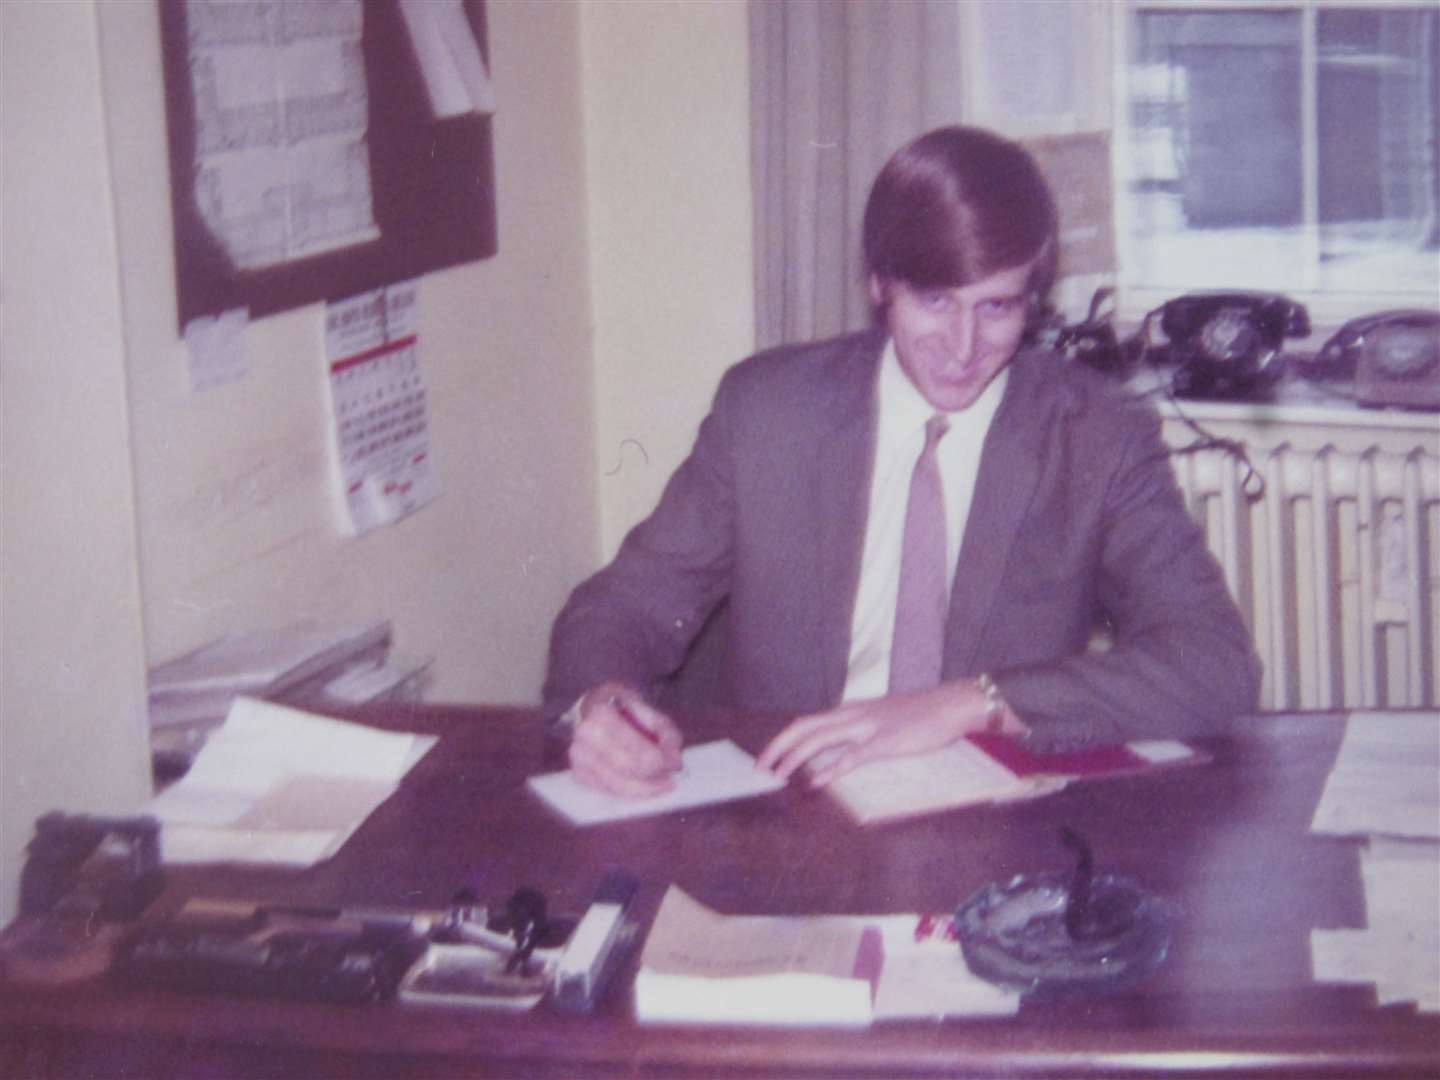 David Bellchambers working in the administration section of the hospital